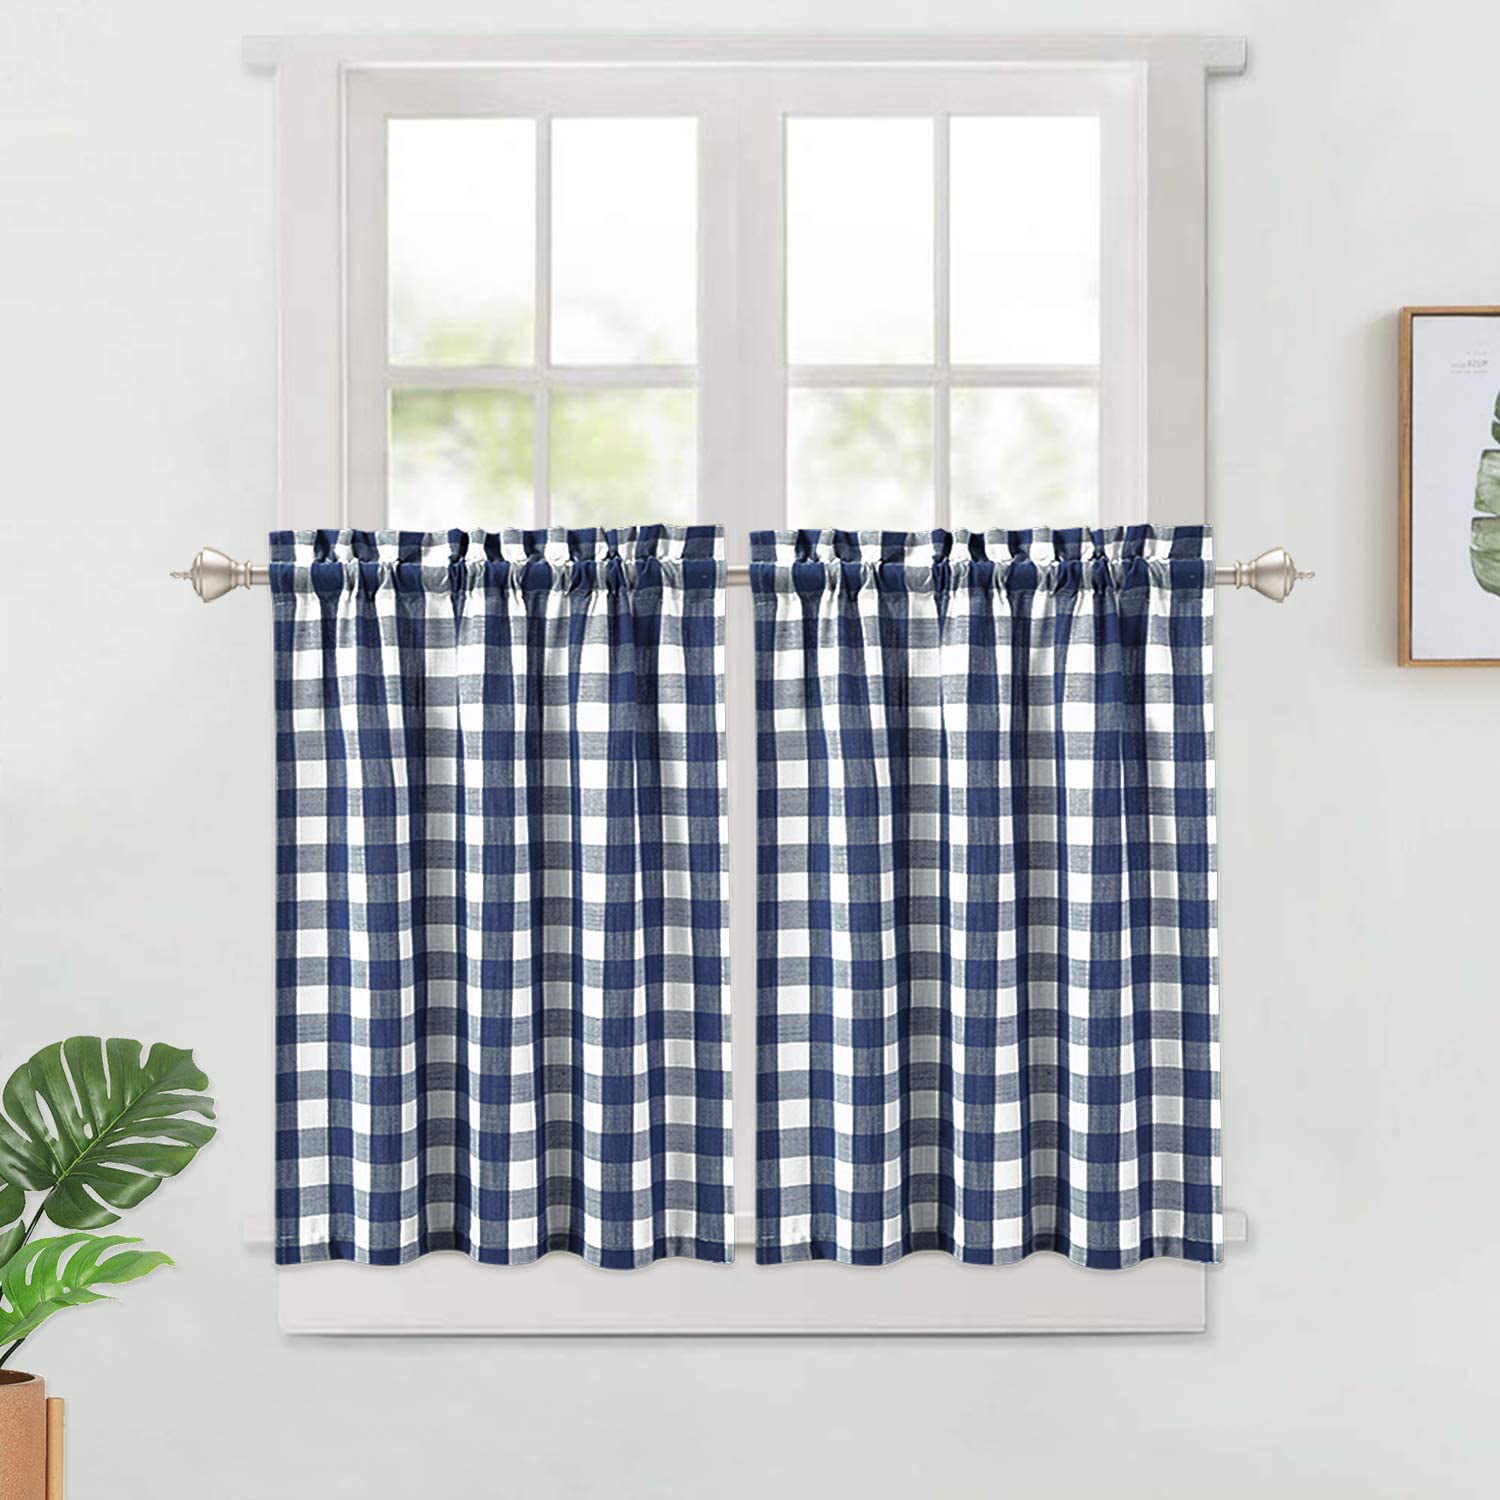 BLUE AND WHITE GINGHAM KITCHEN CURTAINS PELMET & 24” CAFE PANEL *3 SIZES* 